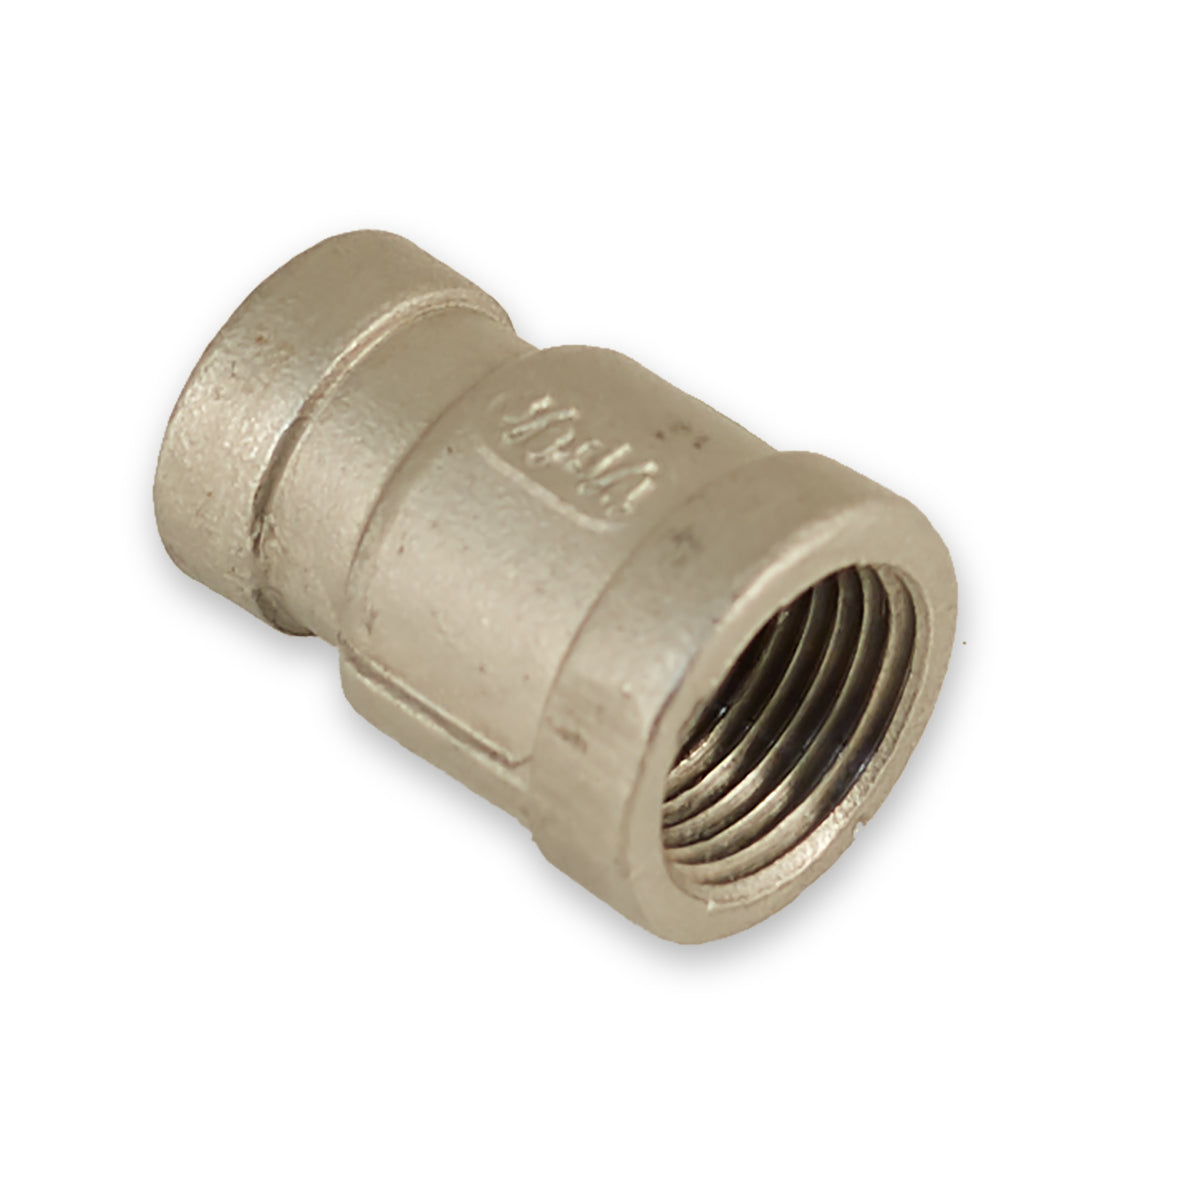 3/8"x1/4" Stainless Threaded Reducing Coupling